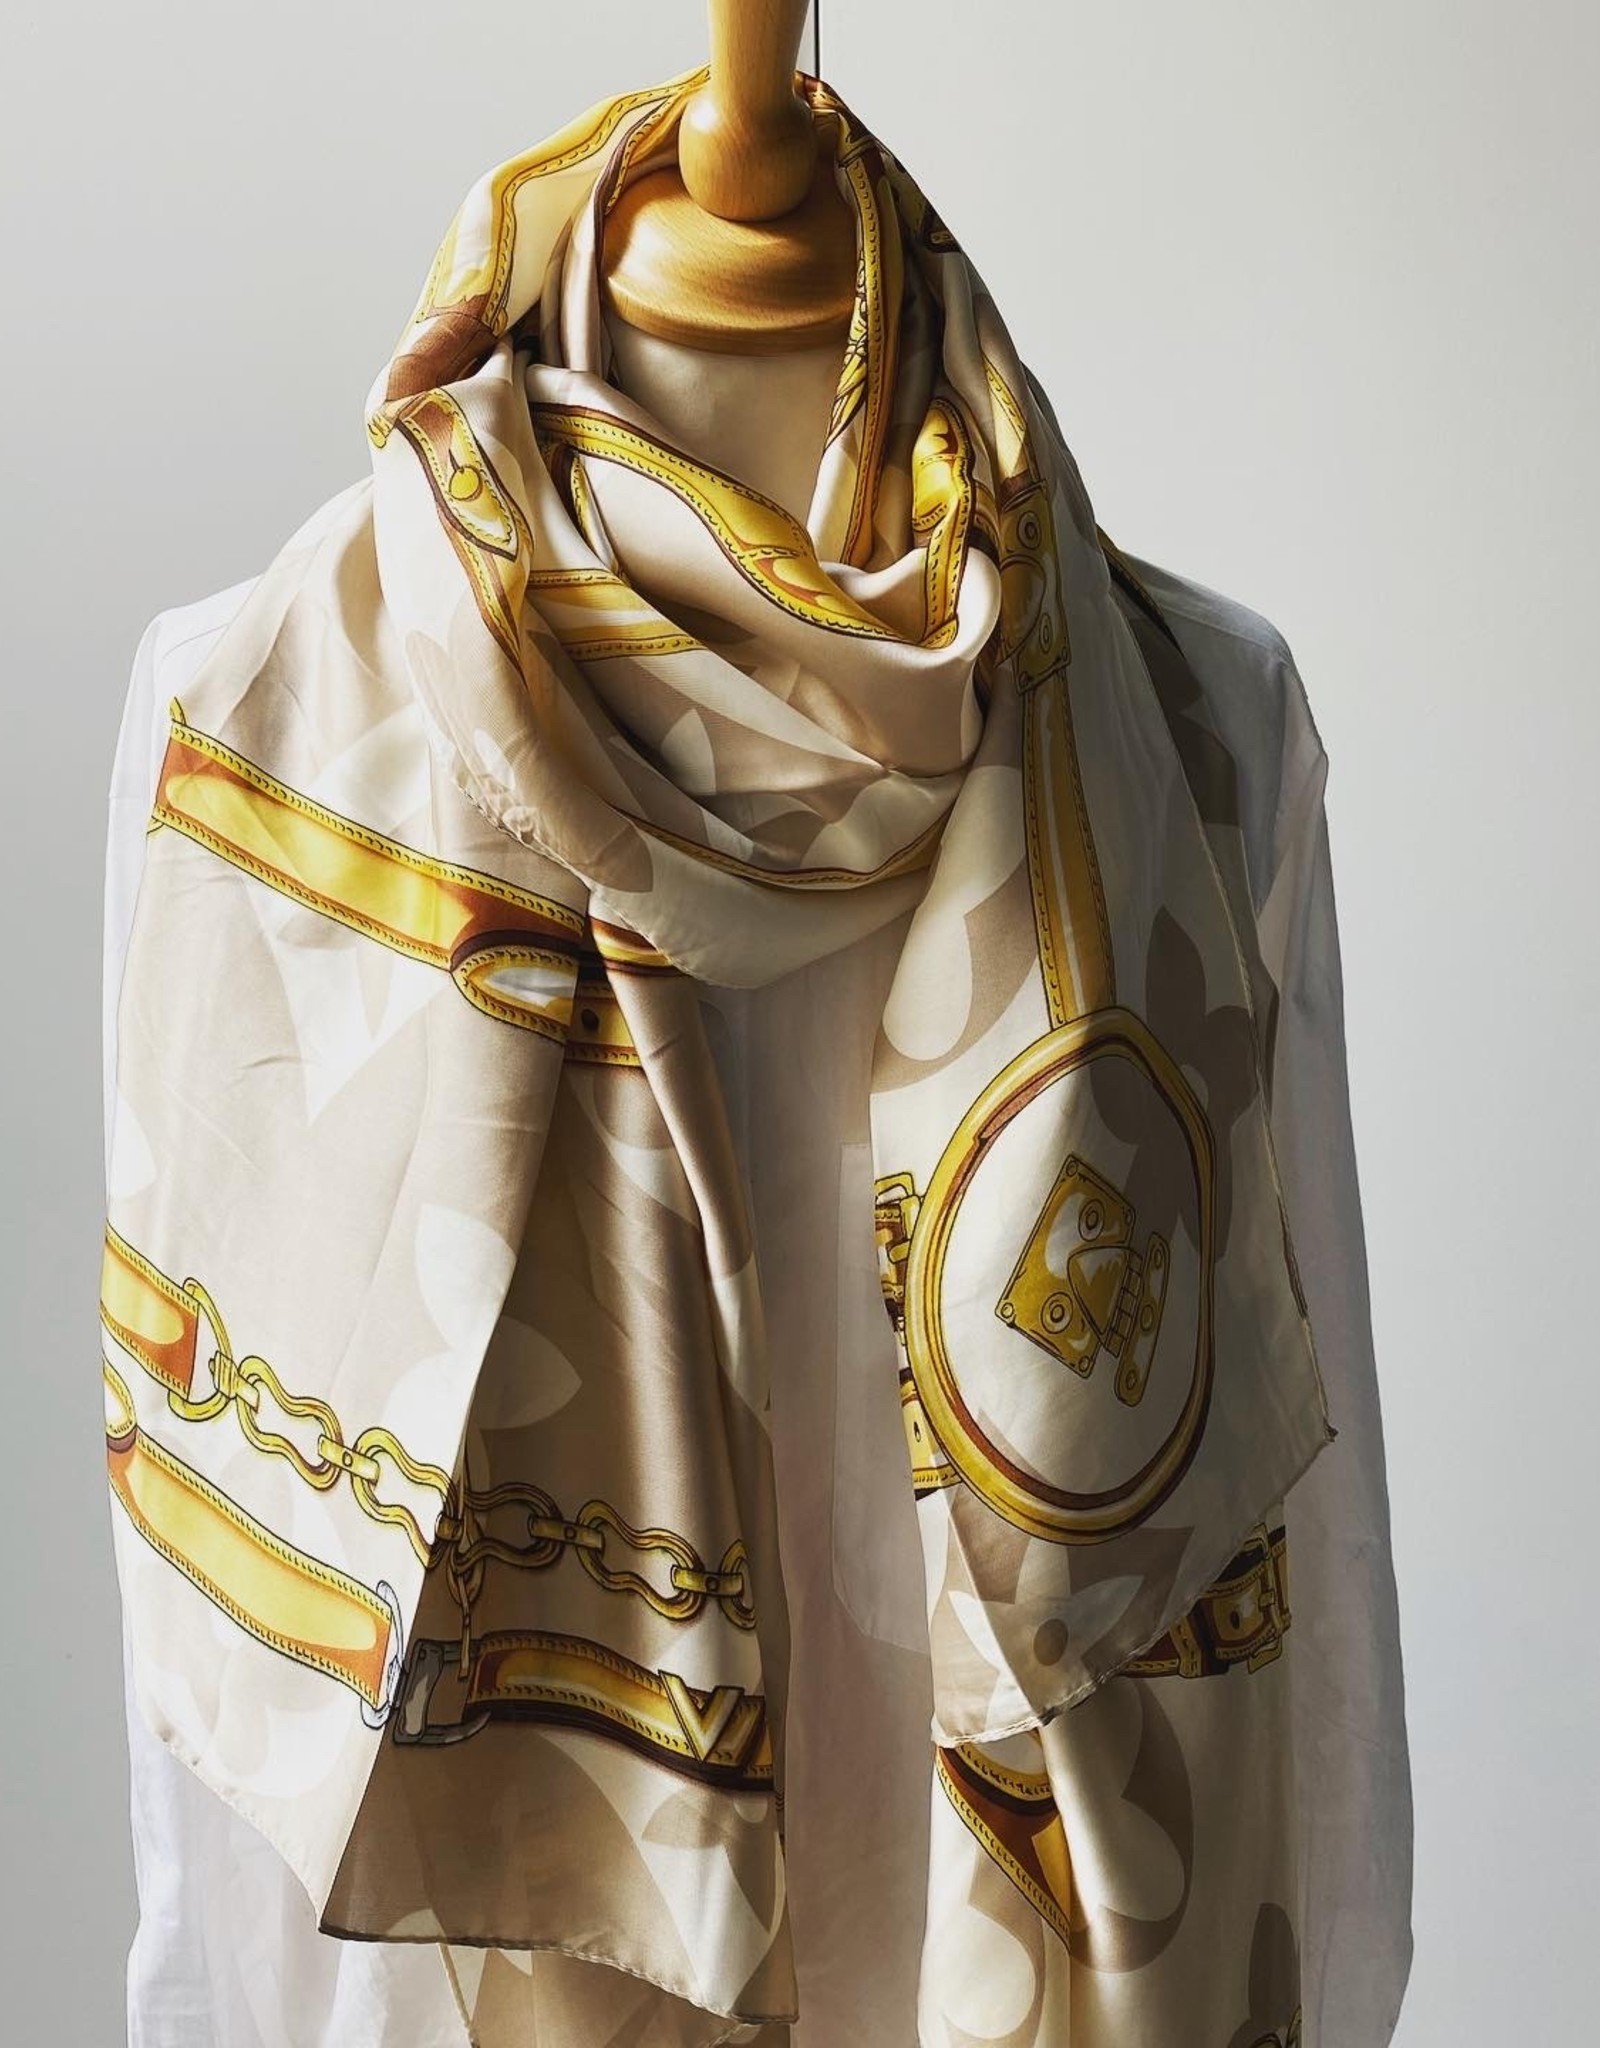 Long scarf with logo in beige colors.